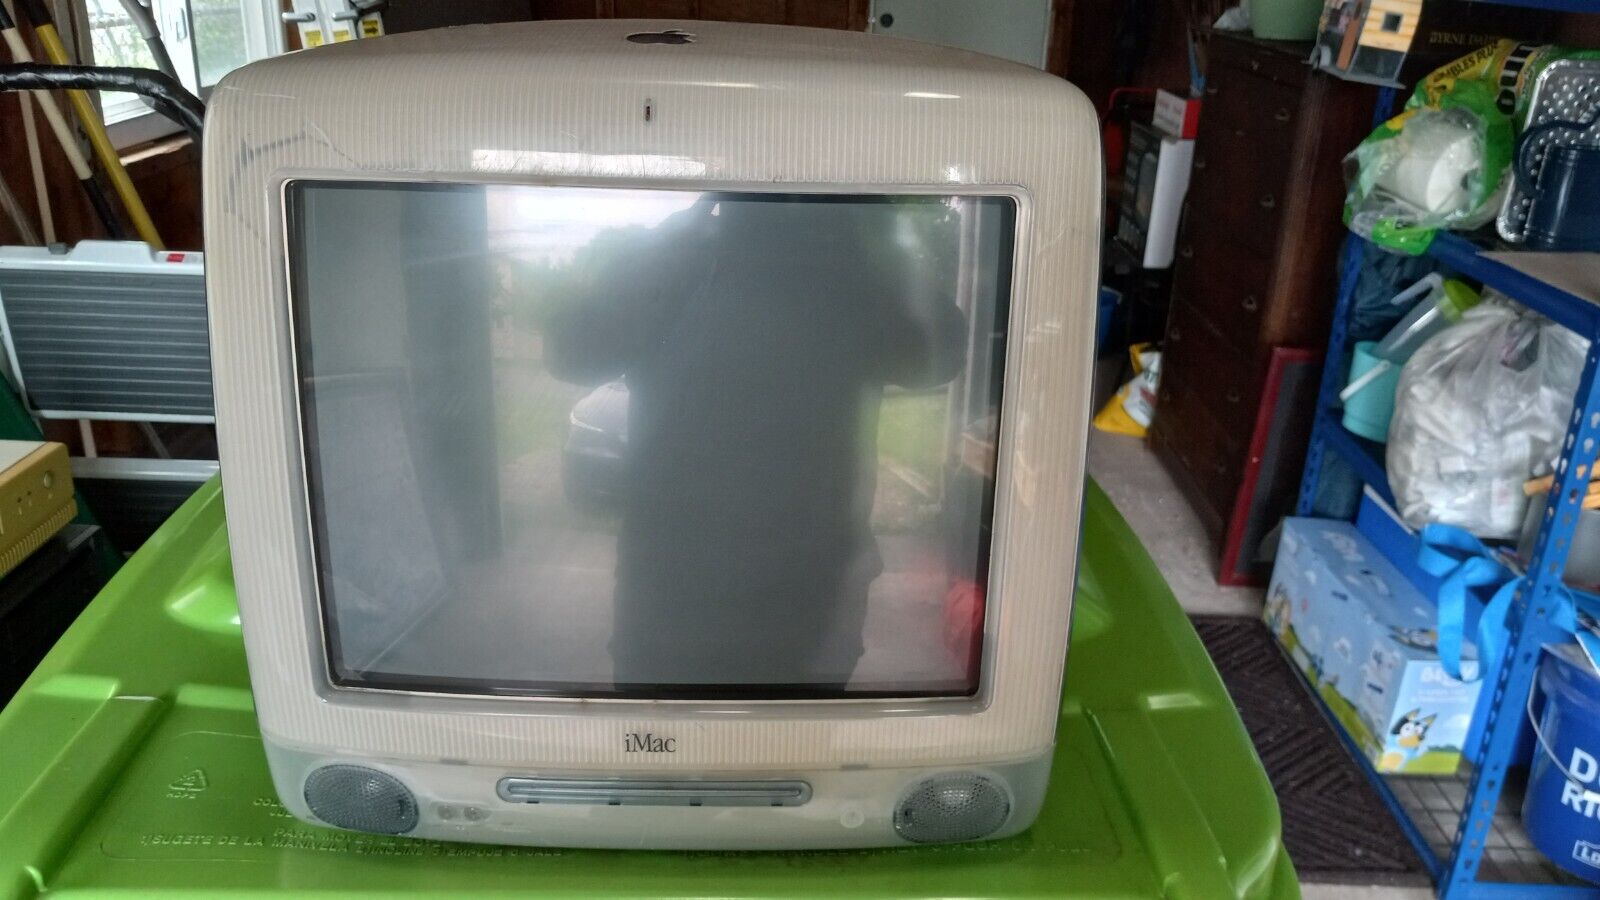 Apple iMac G3 DX Graphite M5521 All In One Computer PC **READ**